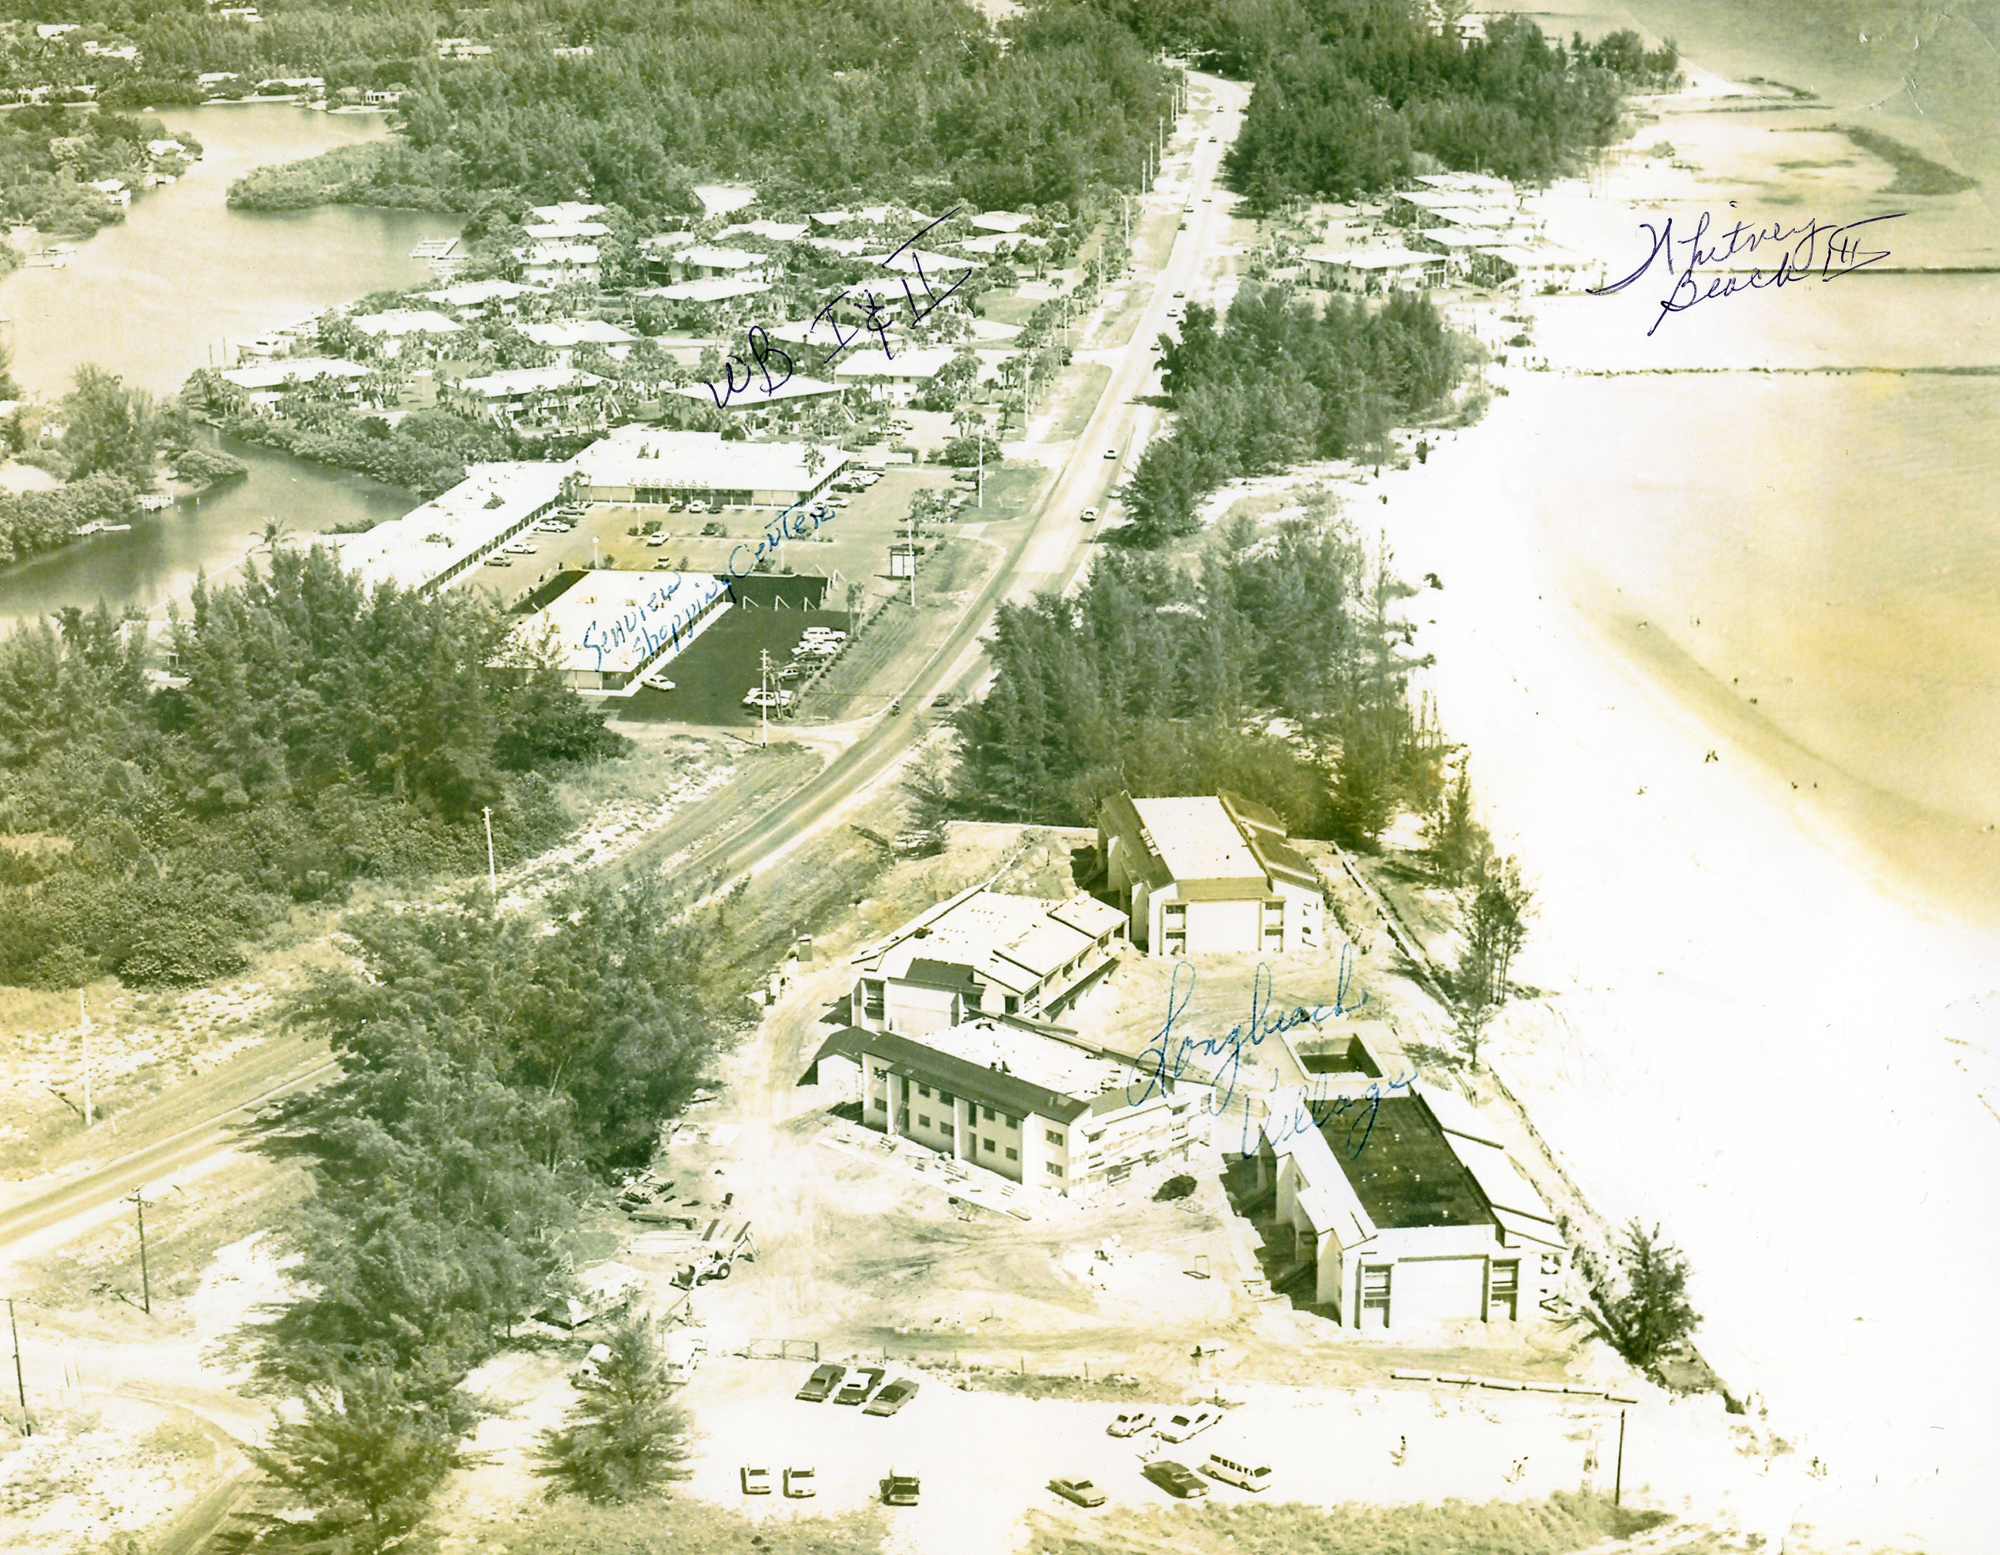 When it first opened, Whitney Beach was one of the first condominium complexes on the island. 